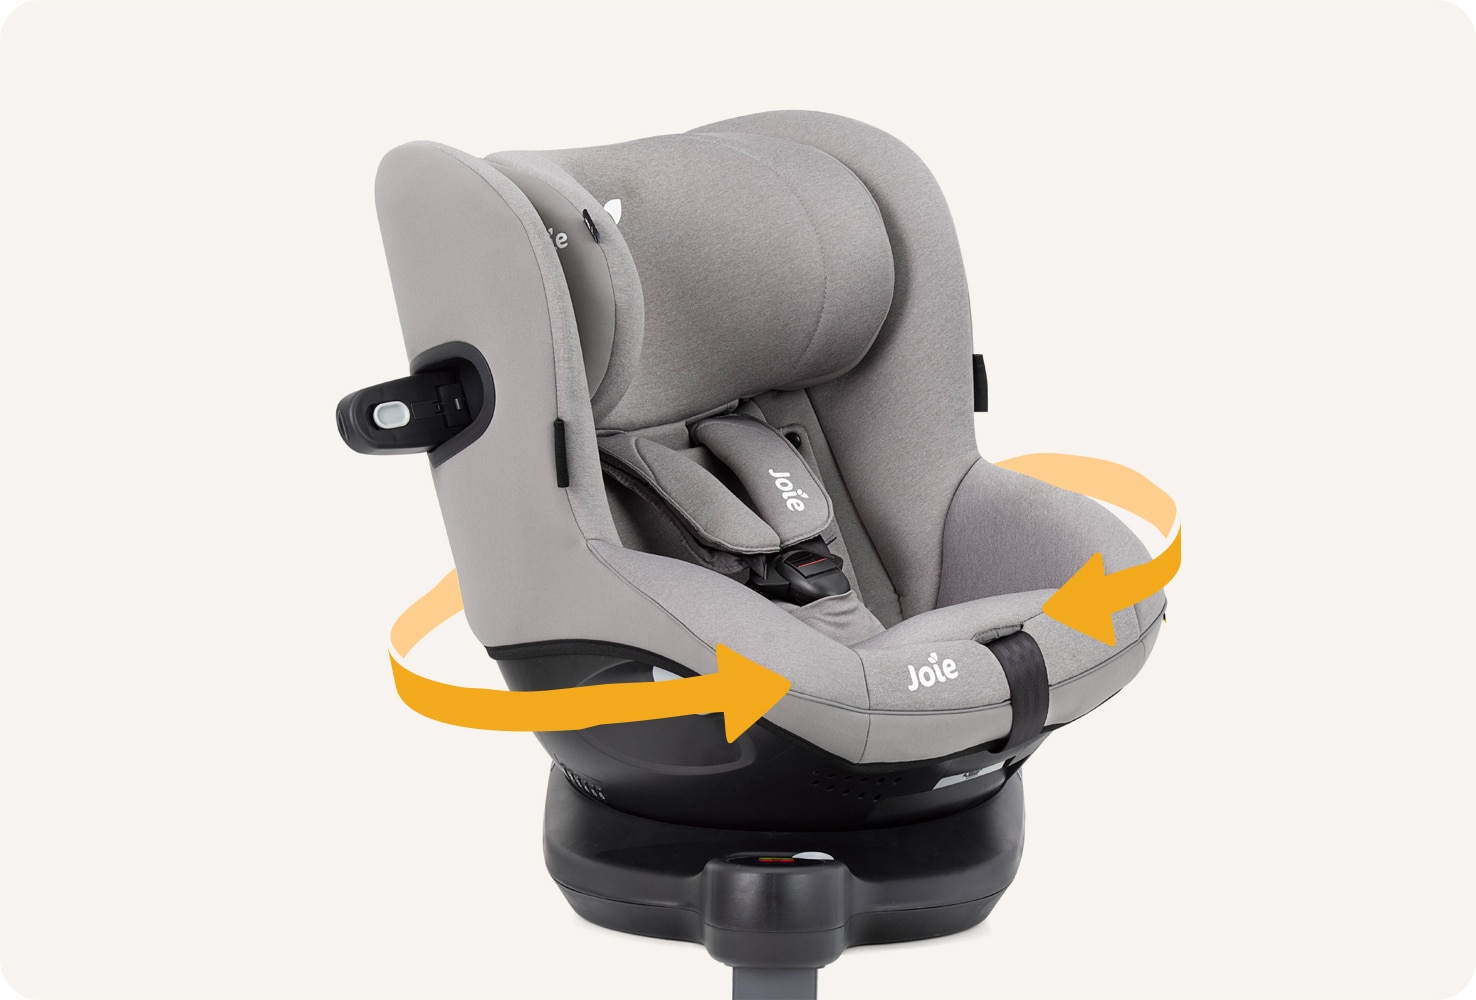    Joie I-Spin 360 E spinning car seat in light gray with the base facing straight on and seat turned 45 degrees to the right, with two orange arrows encircling the seat.